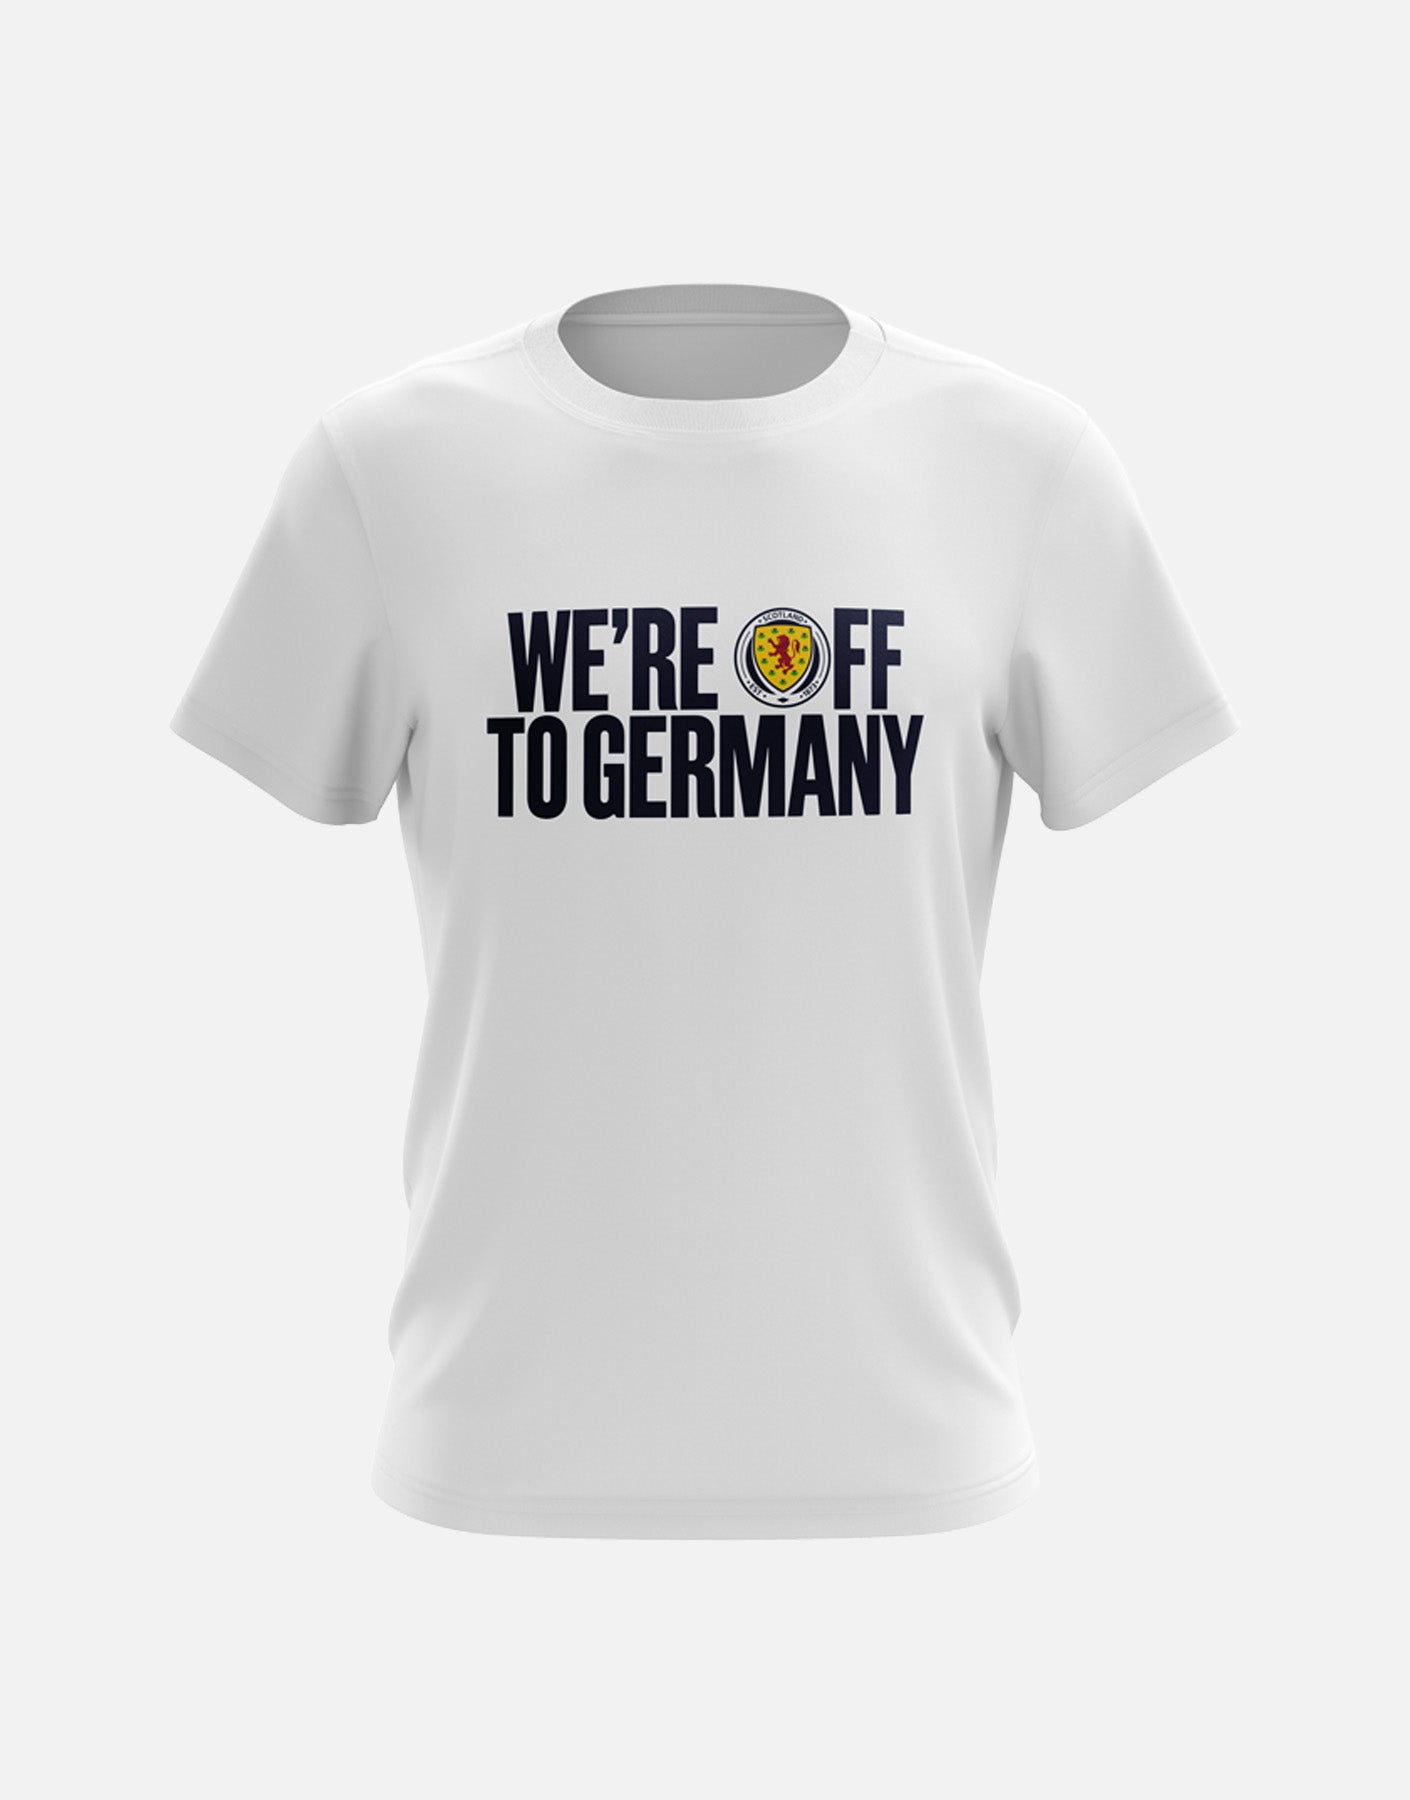 Official Team Scotland 'We're Off To Germany' T-Shirt - The World Football Store